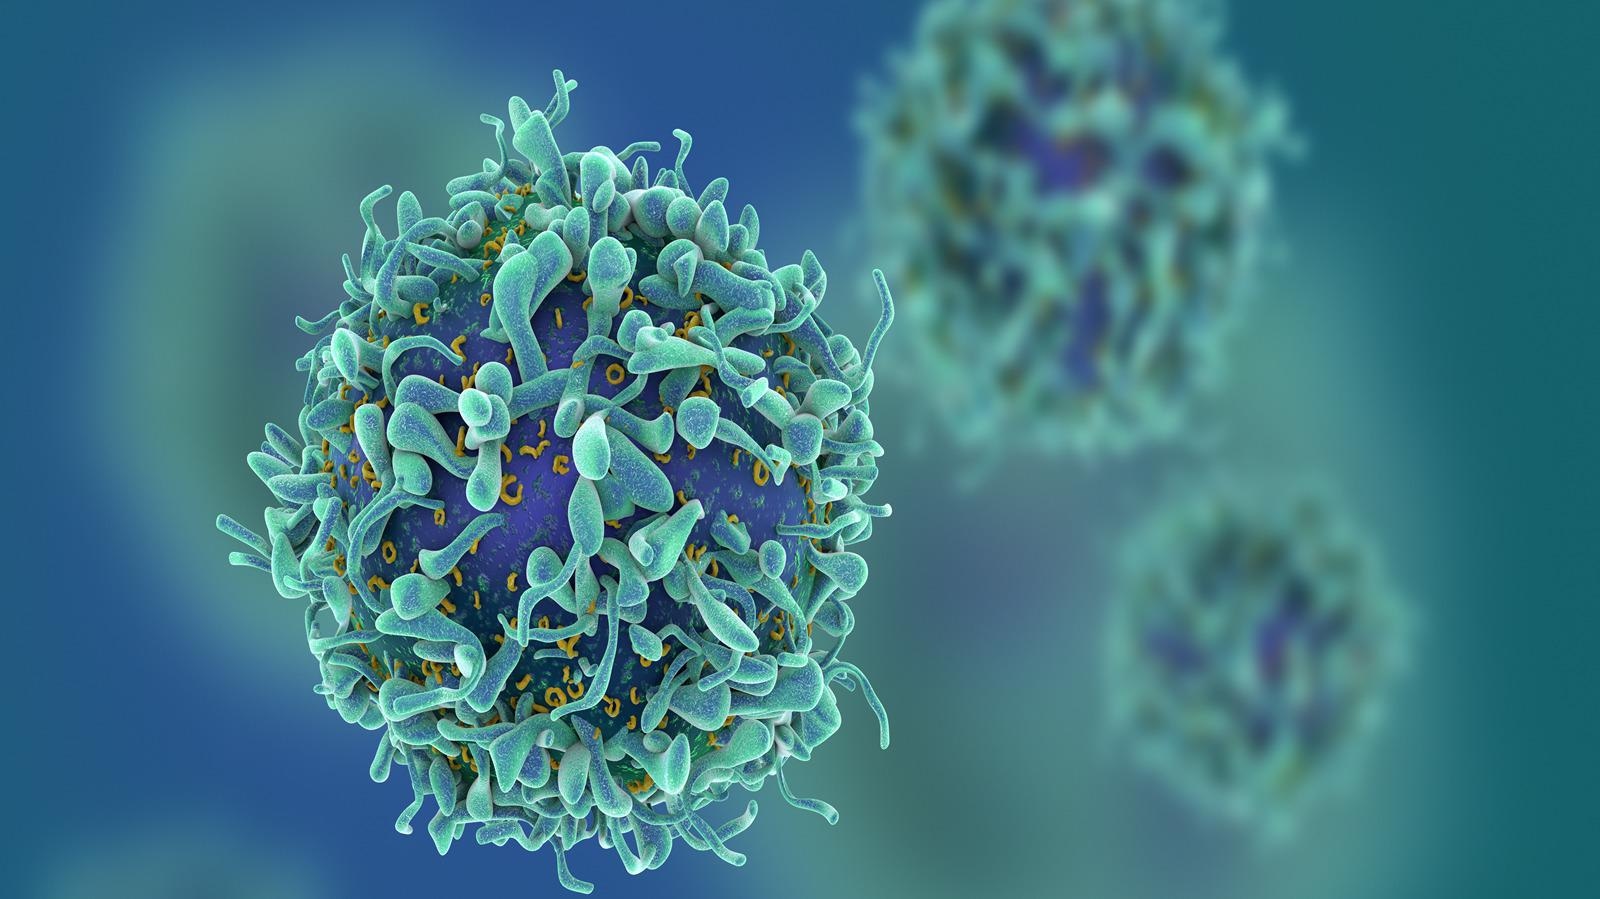 Study: T cell receptor repertoire signatures associated with COVID-19 severity. Image Credit: fusebulb / Shutterstock